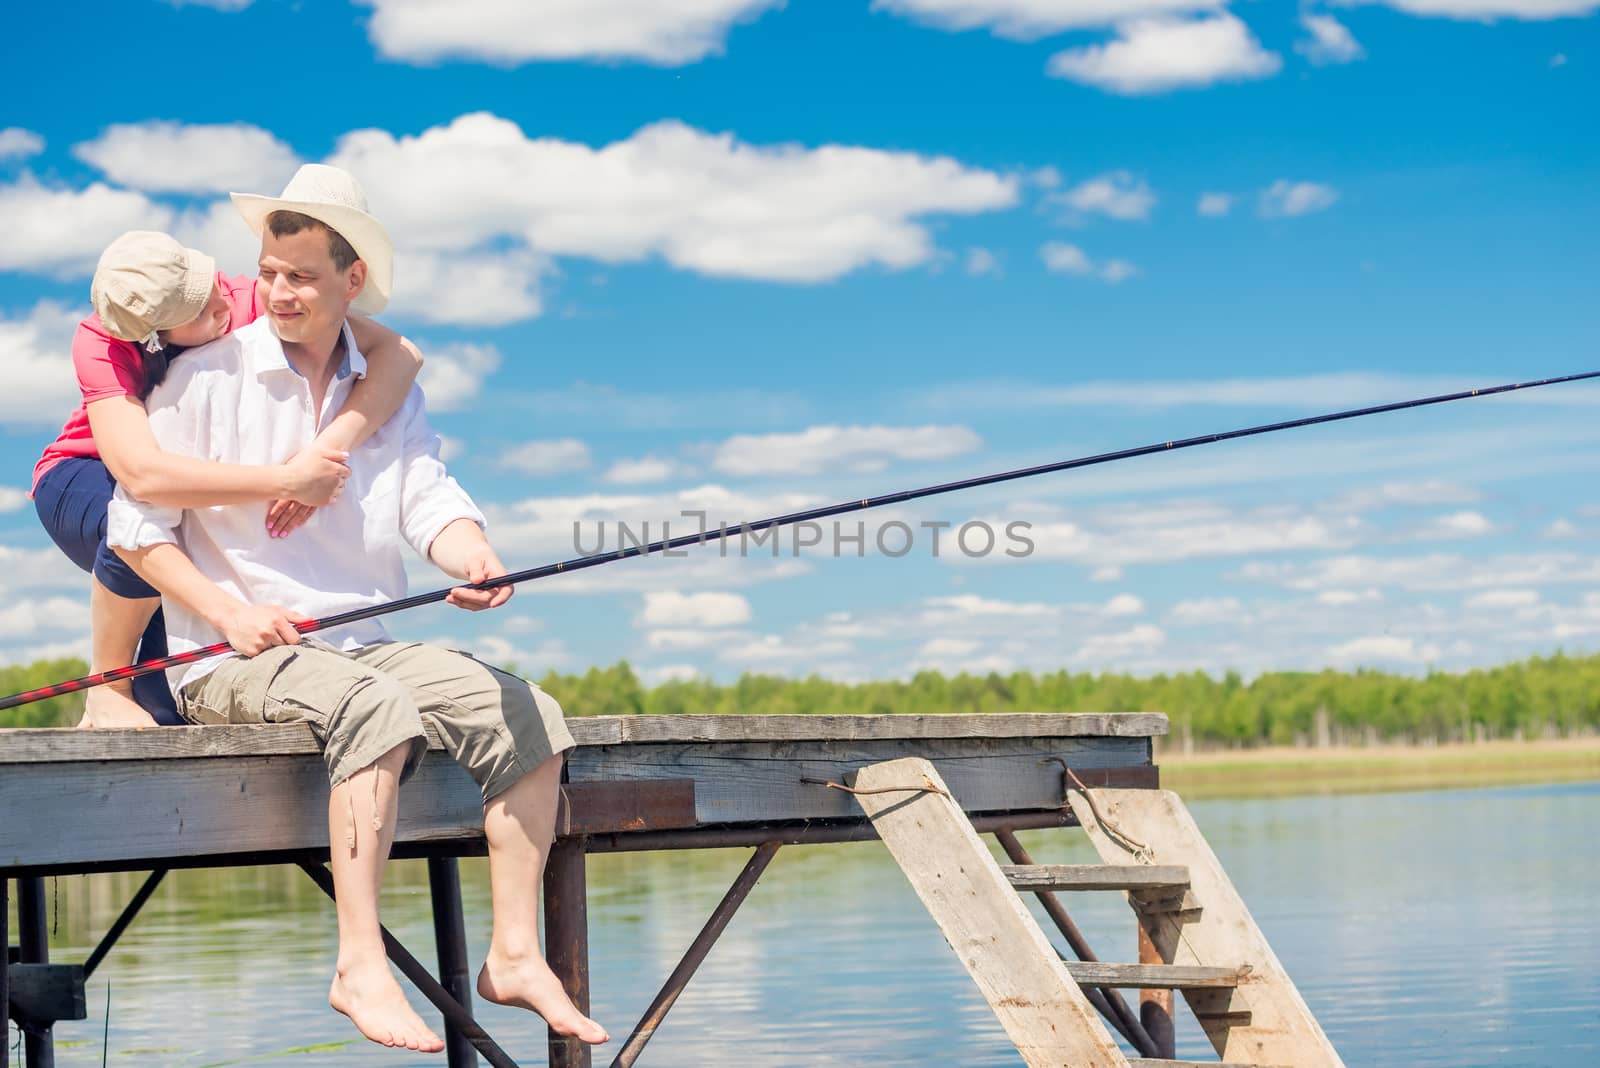 fisherman and his wife on a wooden pier near the lake, a man is by kosmsos111